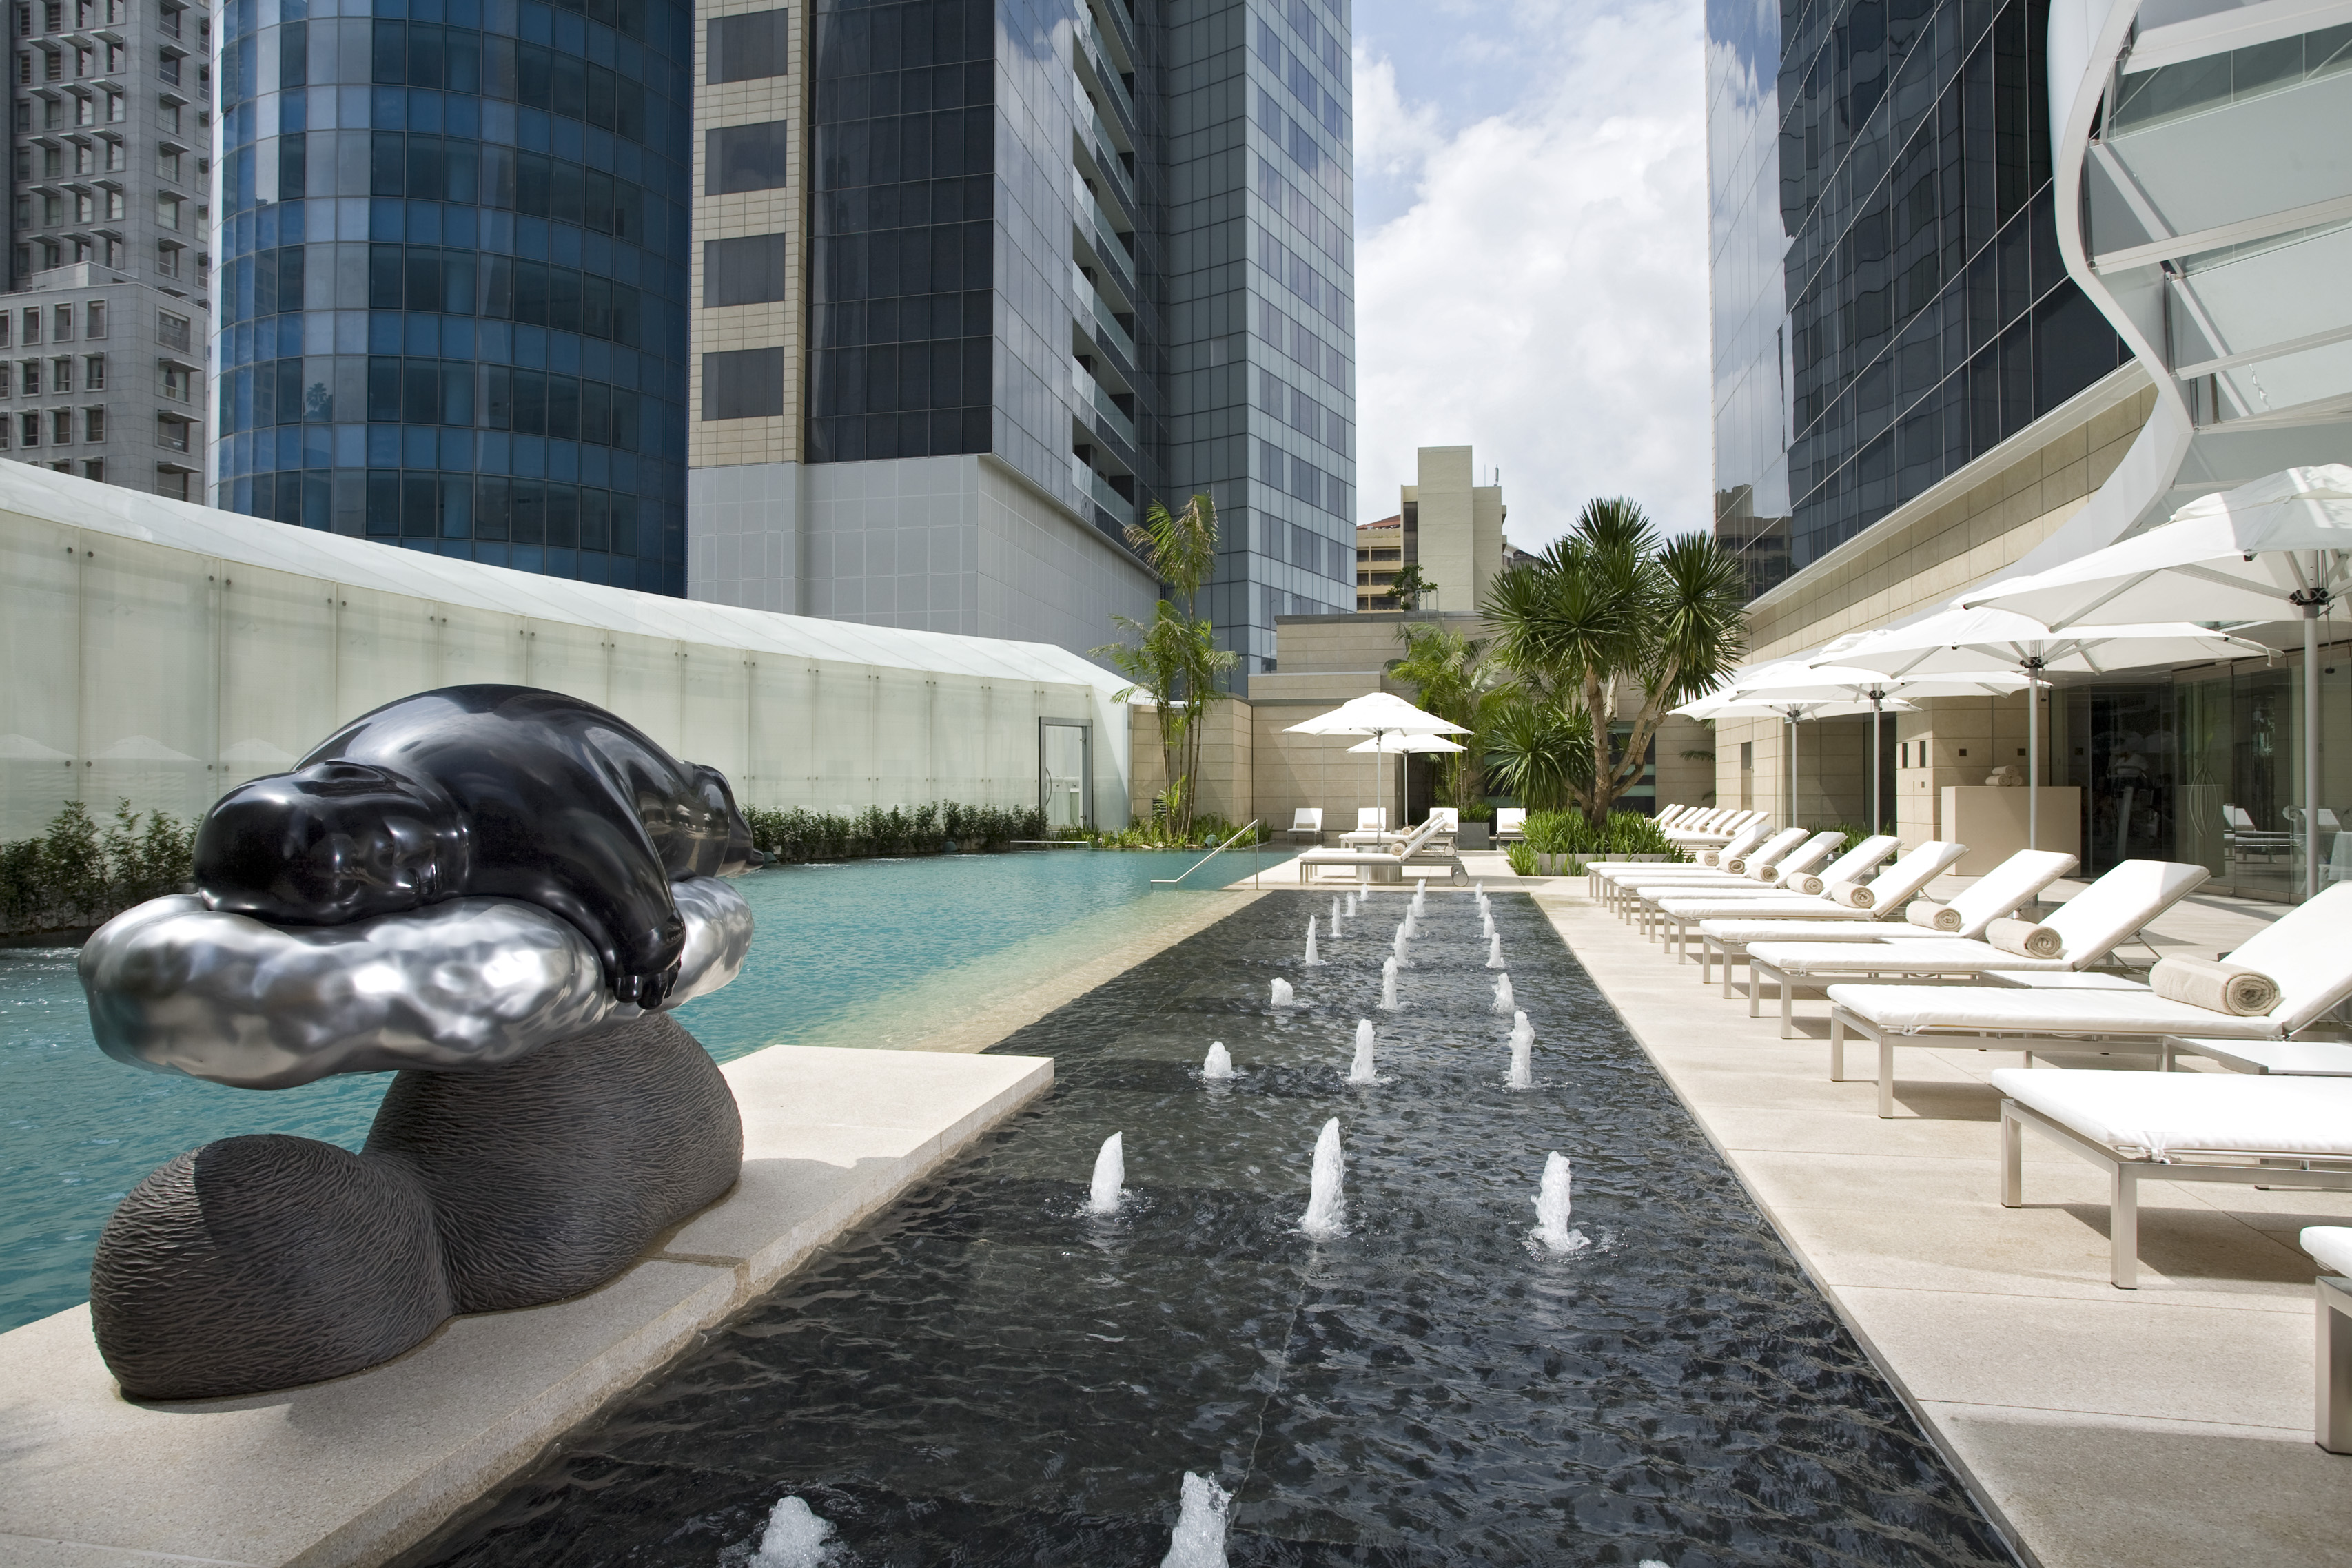 Enjoy moments of calm and serenity at the Poolside ink St Regis Singapore